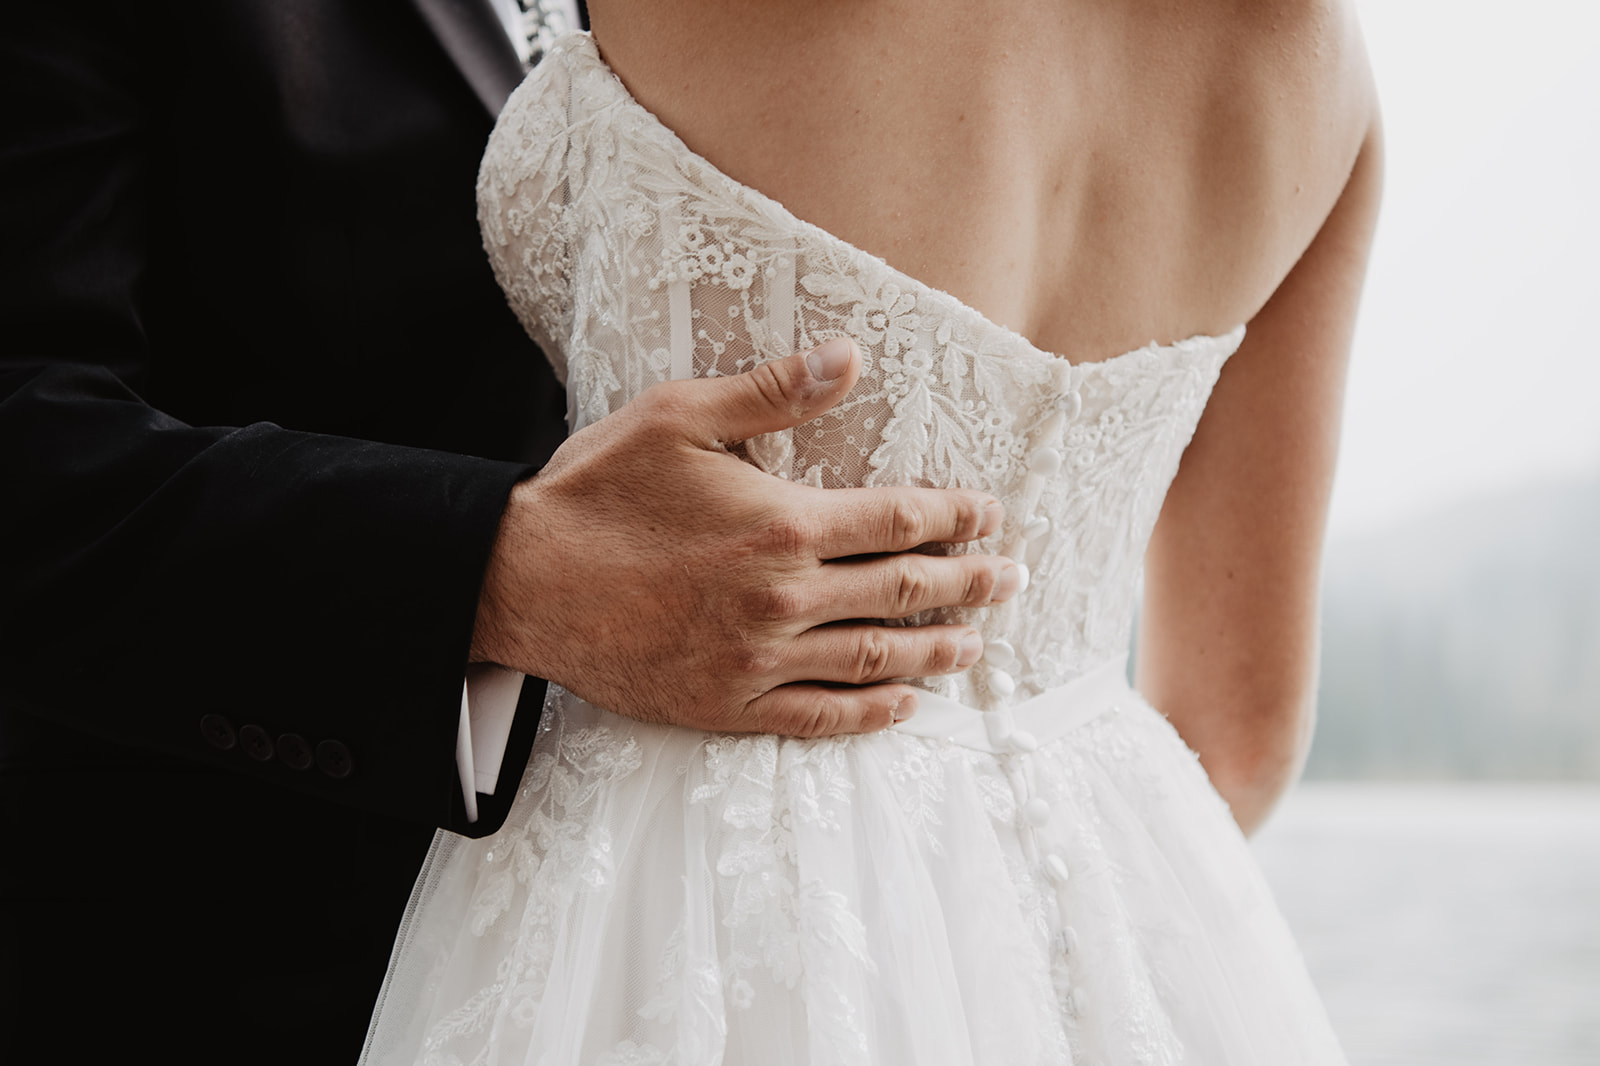 detail shot of the back of a brides lace dress while the groom holds her back as they are dancing